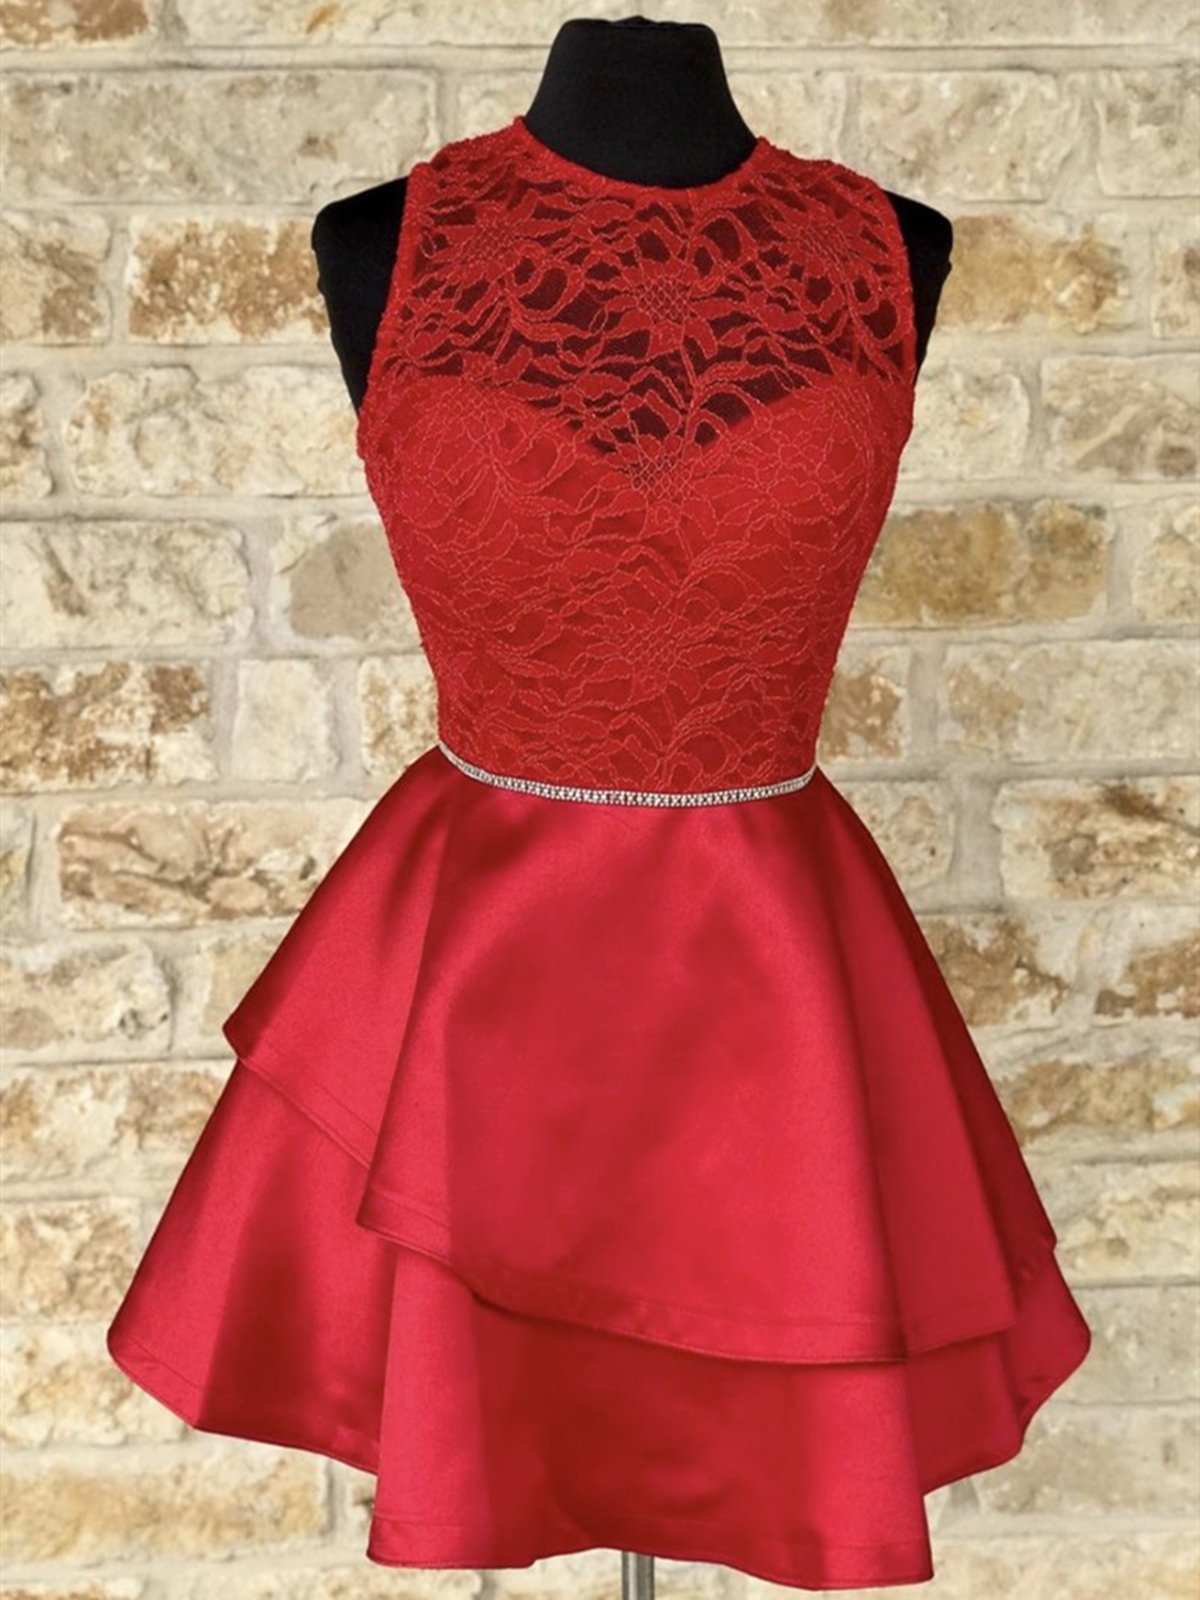 Prom Dress Piece, Short Red Lace Prom Dresses, Short Red Lace Formal Homecoming Dresses